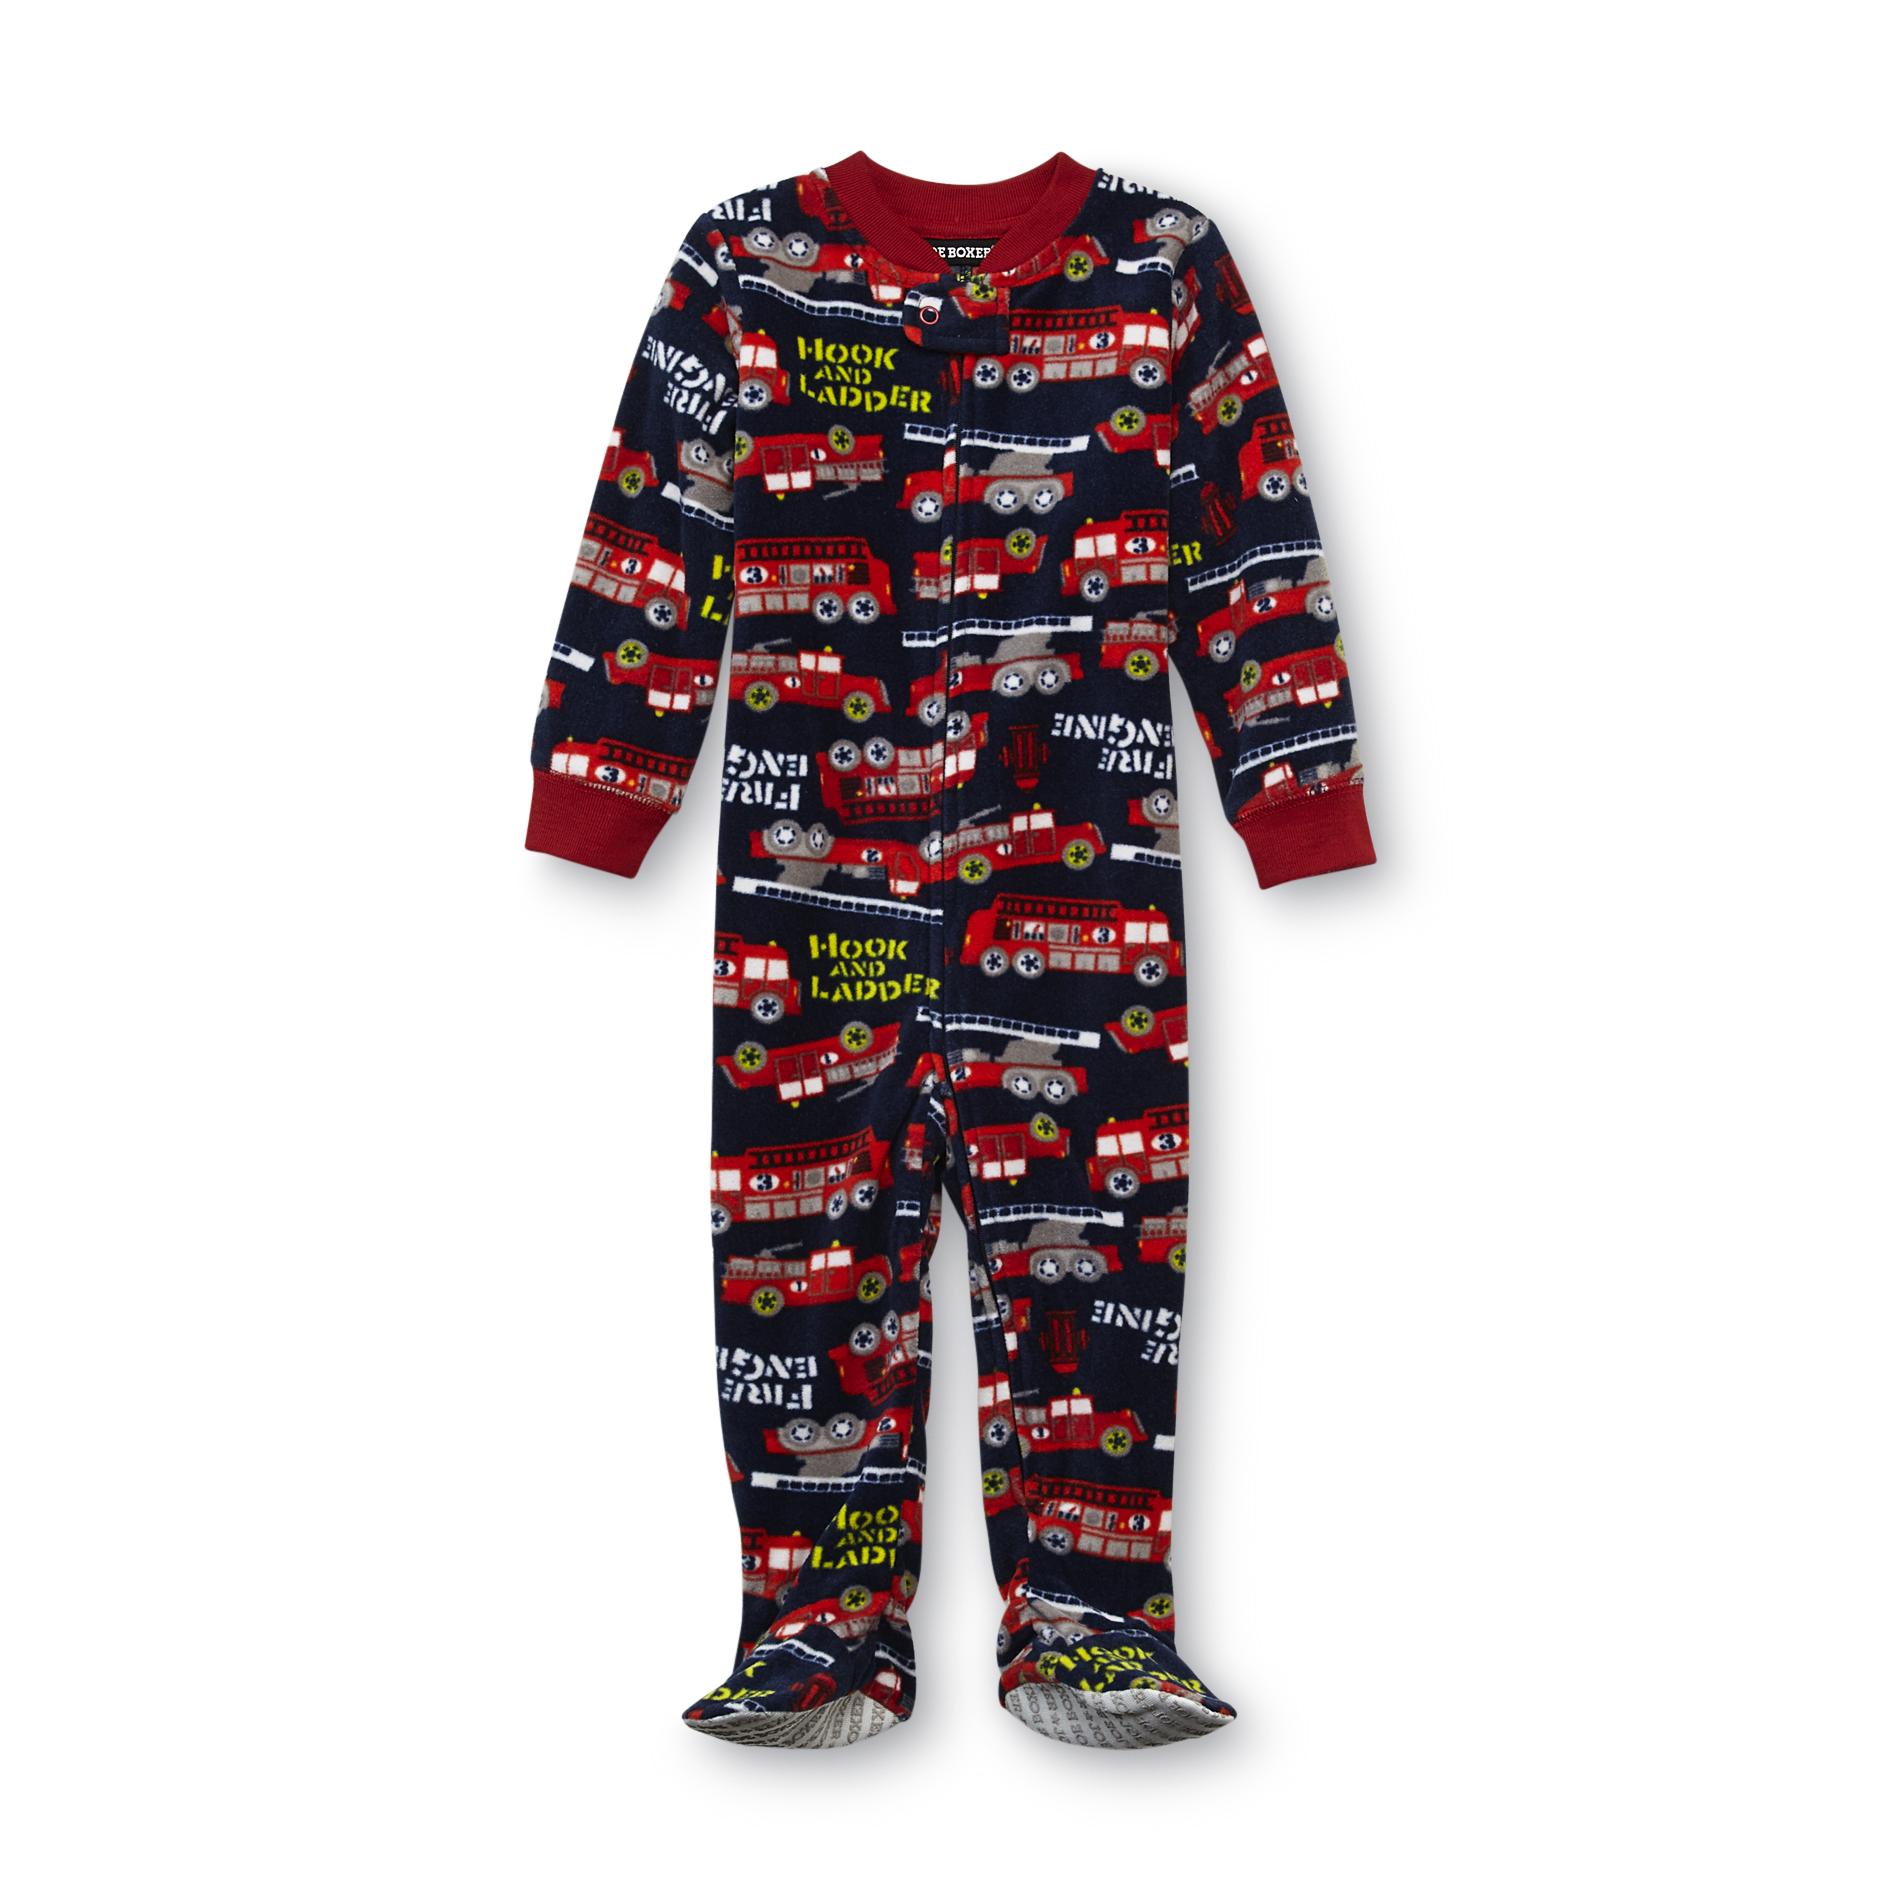 Joe Boxer Infant & Toddler Boy's Footed Sleeper Pajamas - Fire Engines